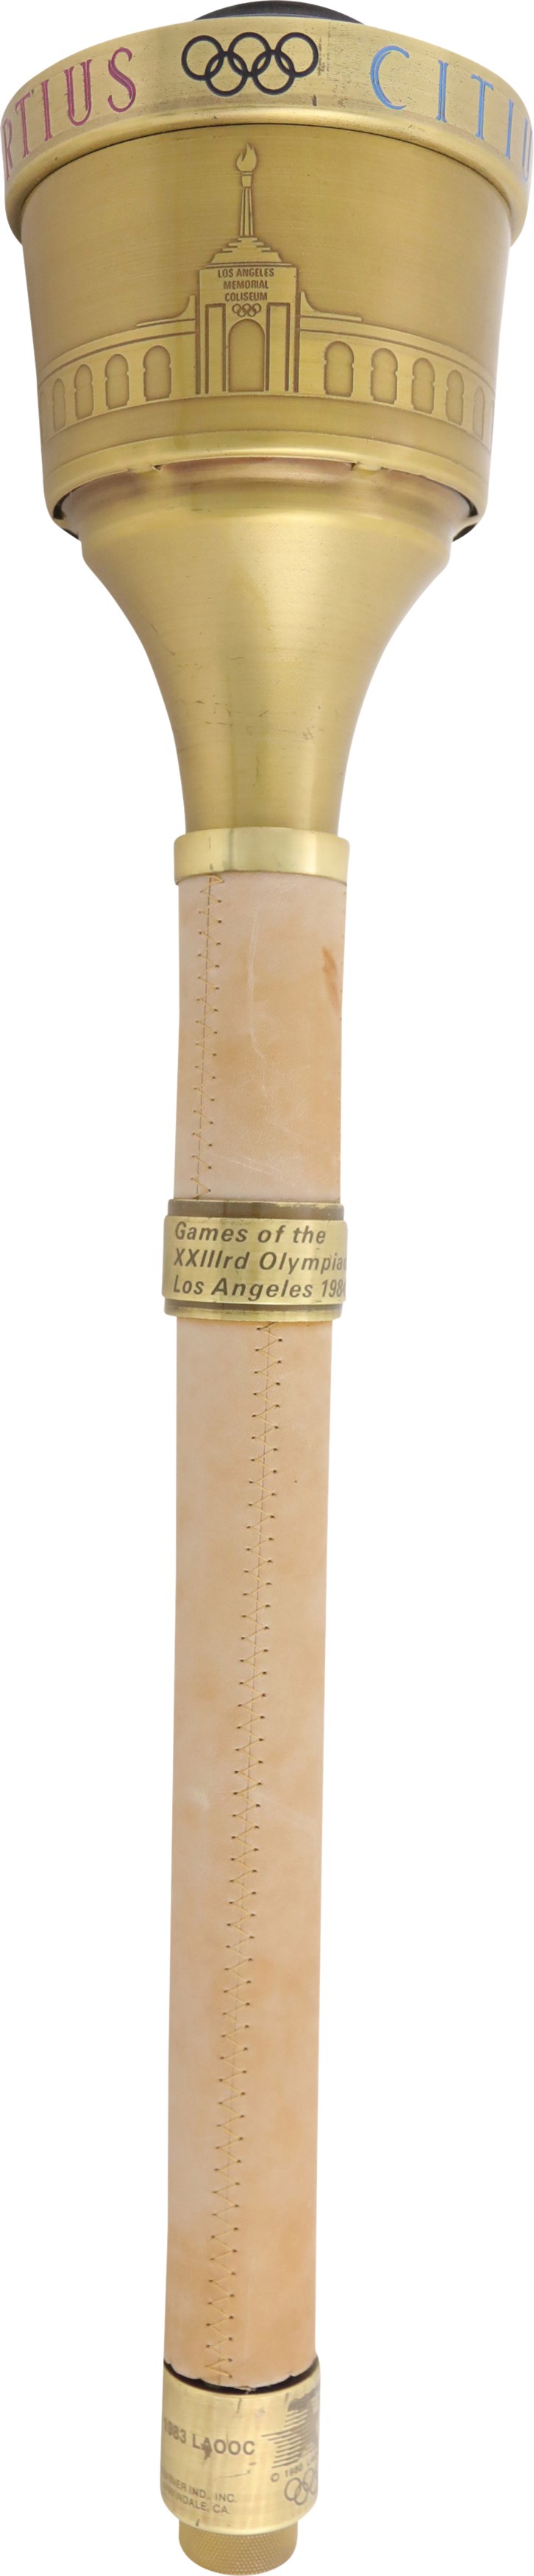 Olympics and All Sports - 1984 Los Angeles Olympics Summer Games Relay Torch